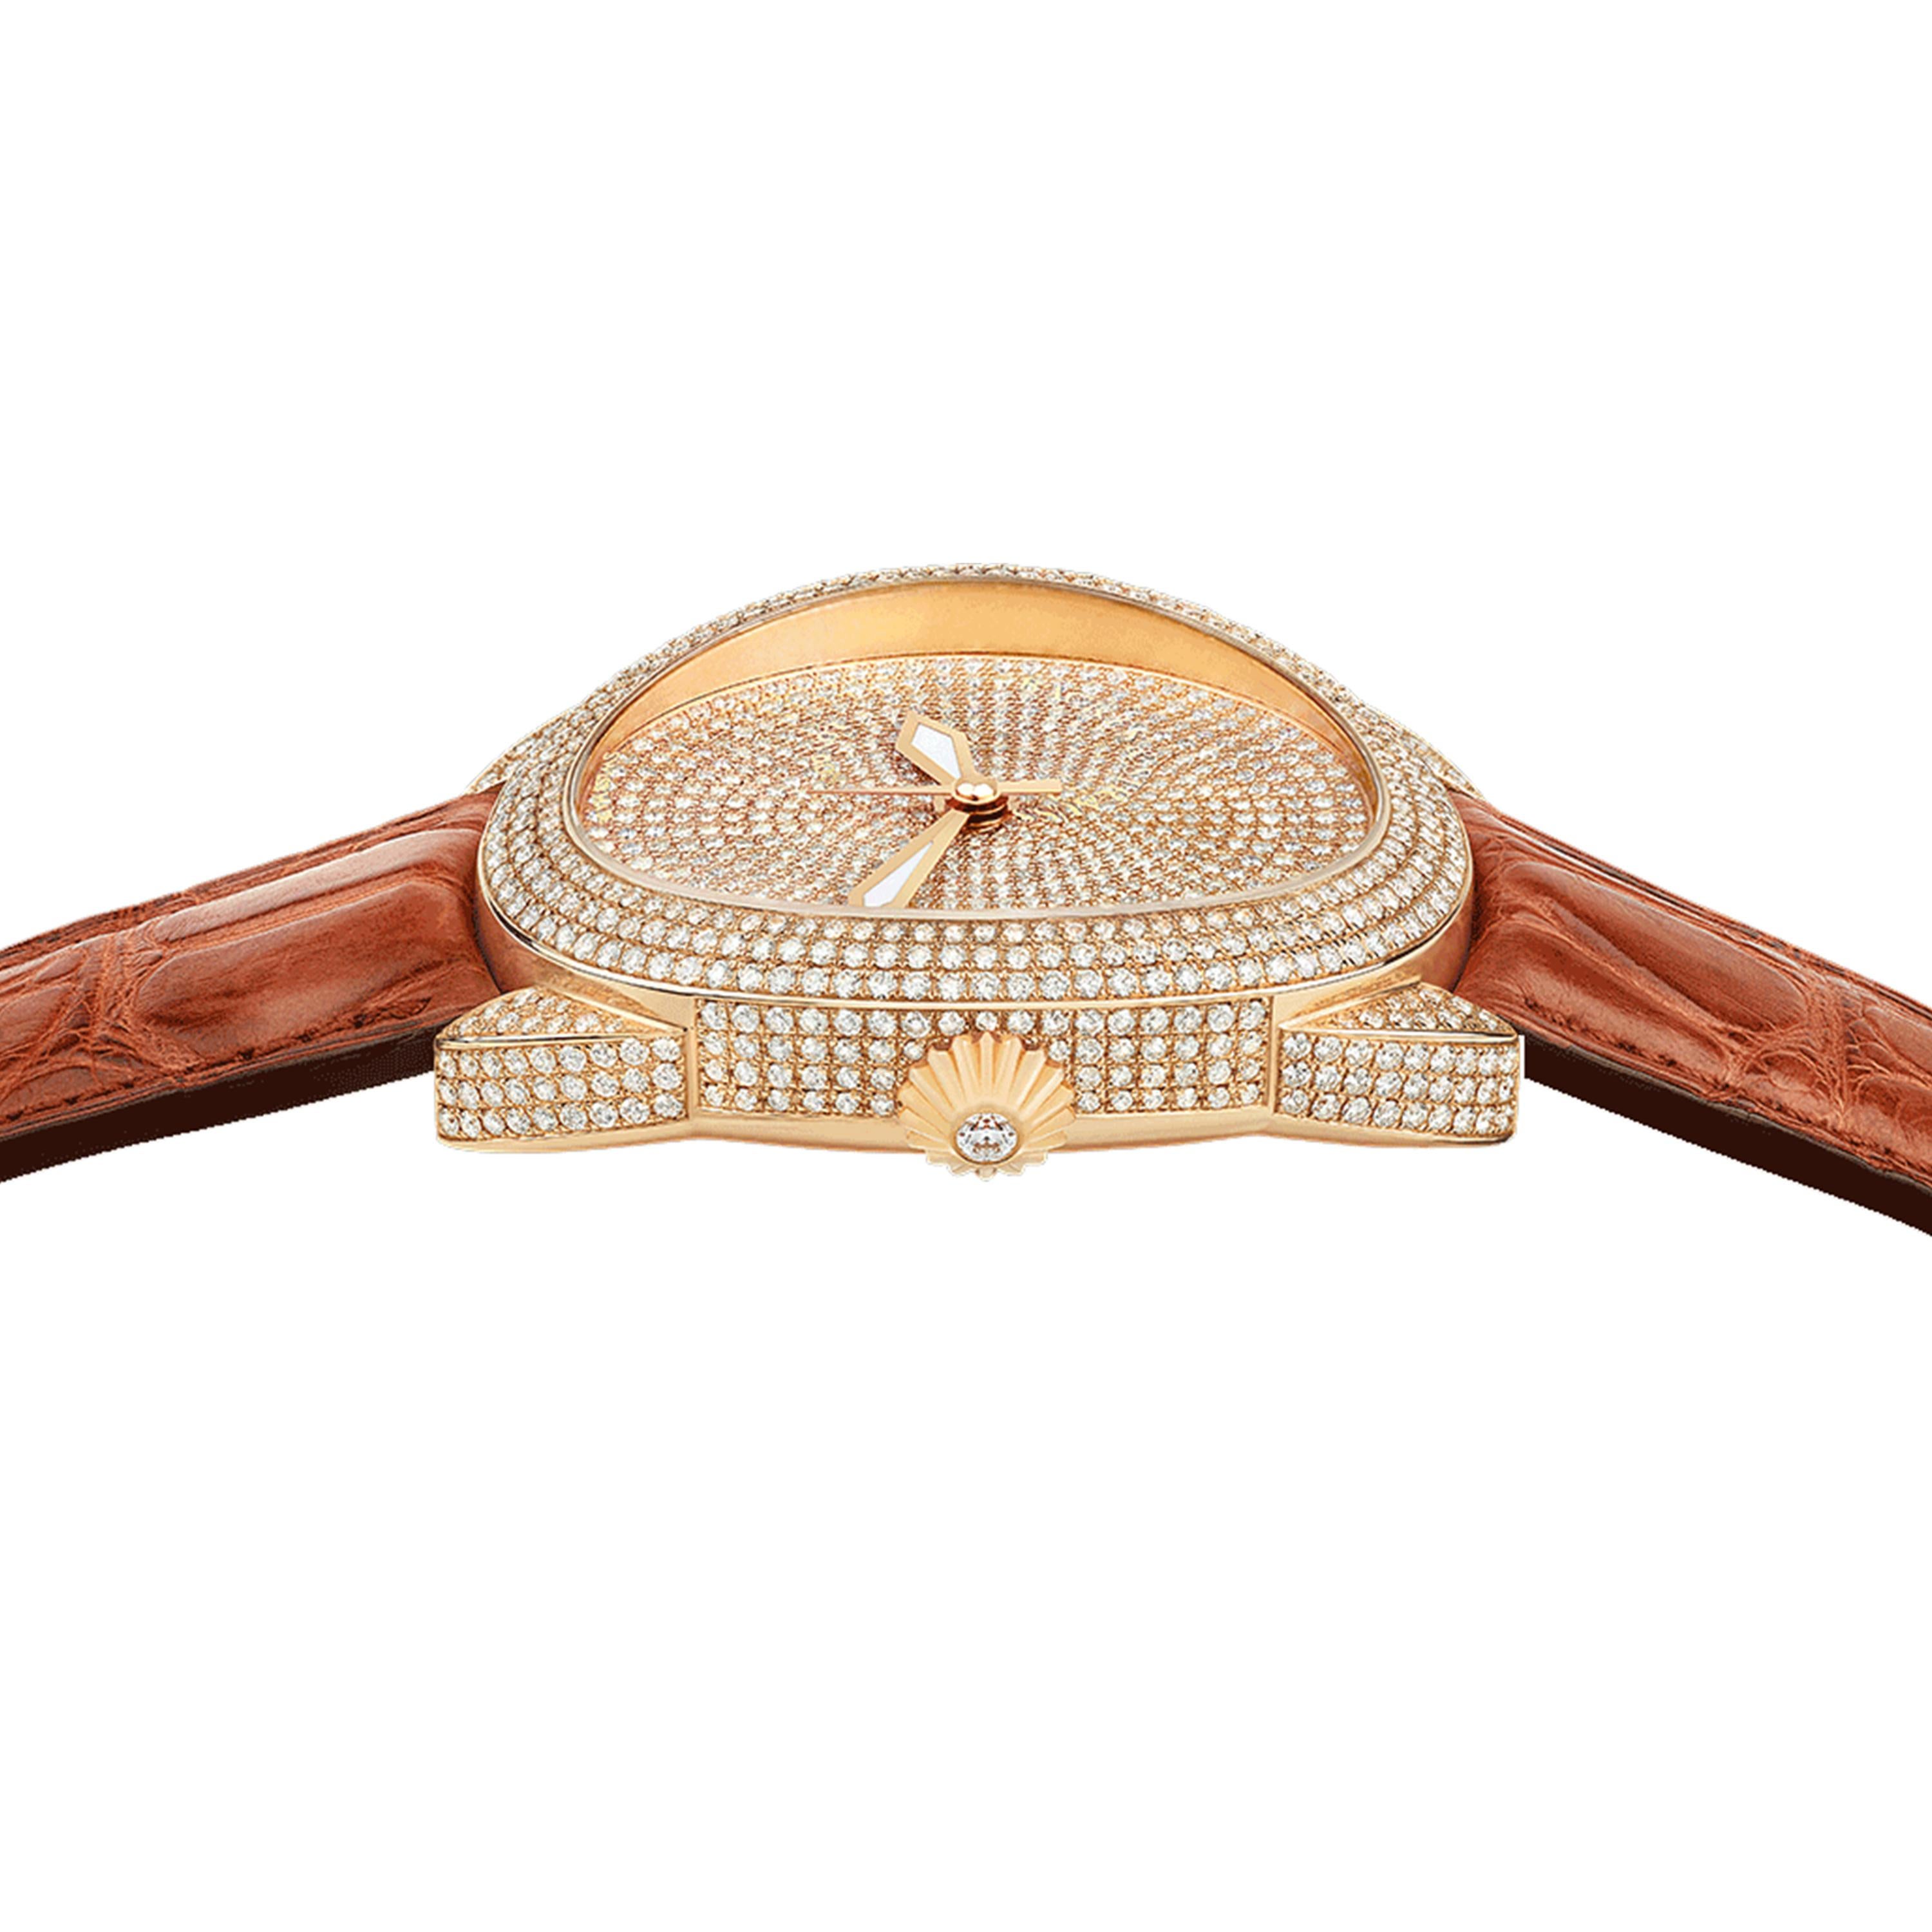 Regent Monarch 4047 is a luxury diamond watch for women crafted in 18kt Rose gold, featuring fully set diamond dial, automatic movement. The case, dial and buckle are set with white Ideal Cut diamonds. It is a 40 mm x 47 mm statement watch with the